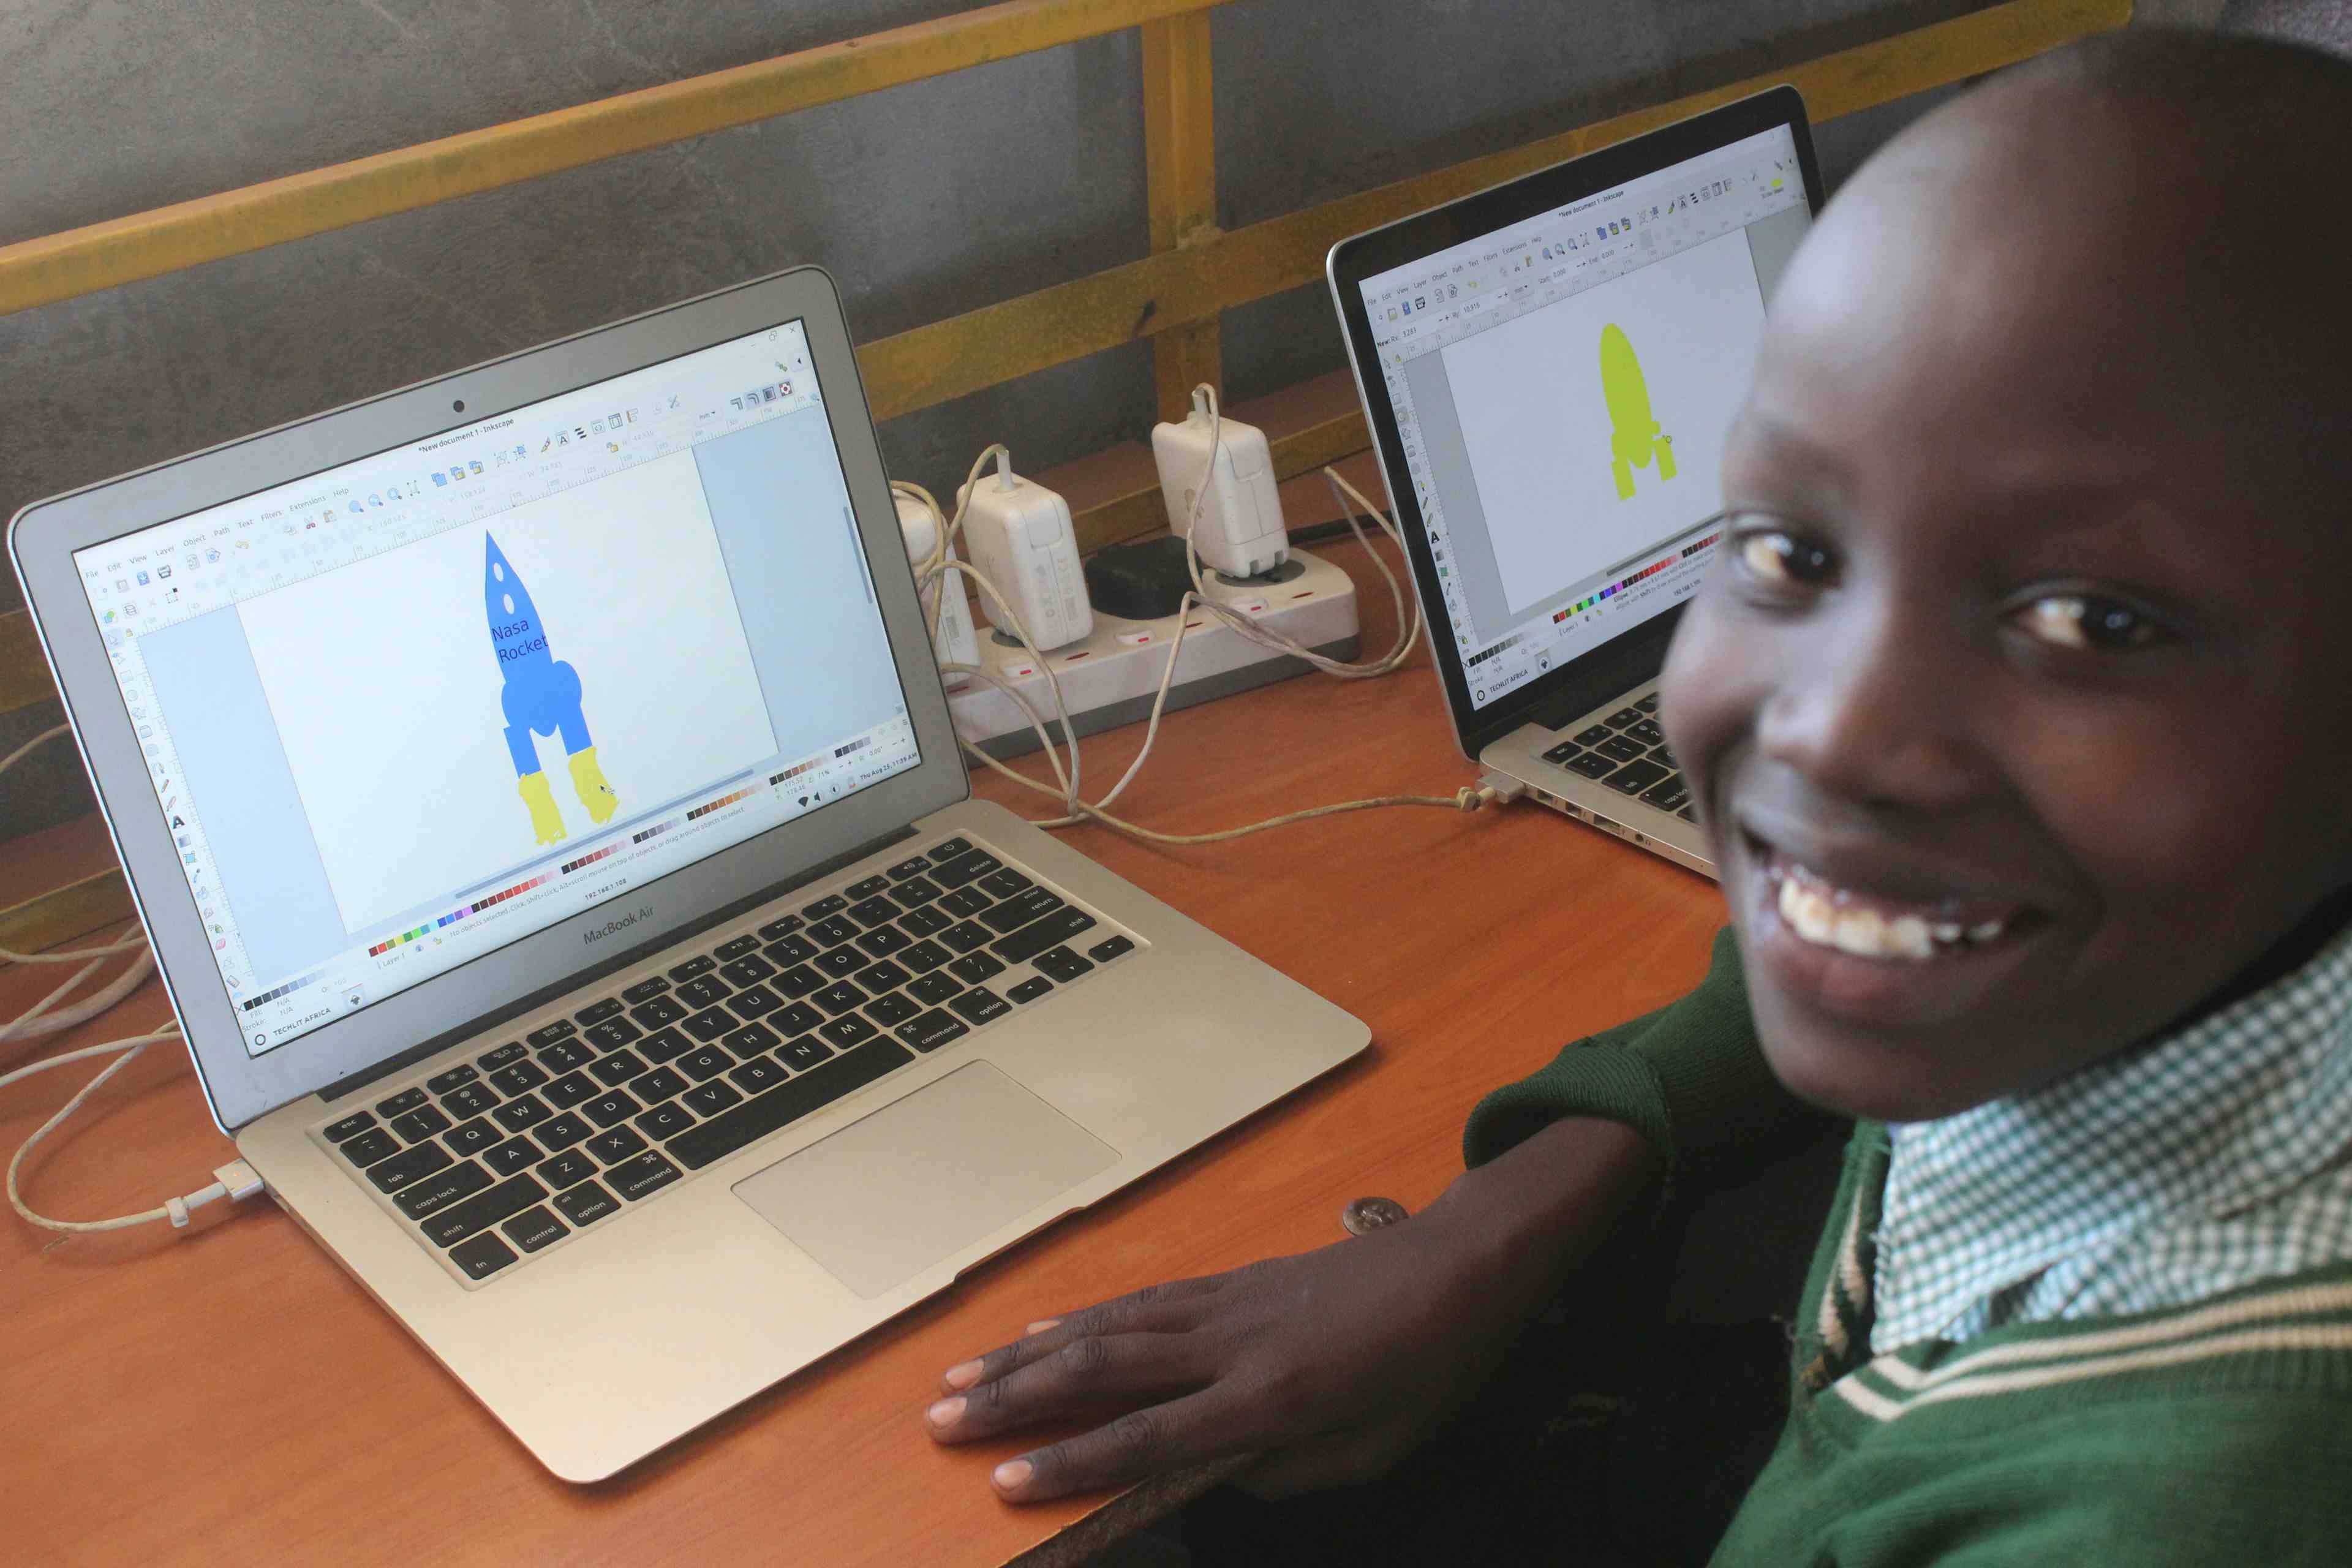 Sammy showing rockets on his inkscape screen